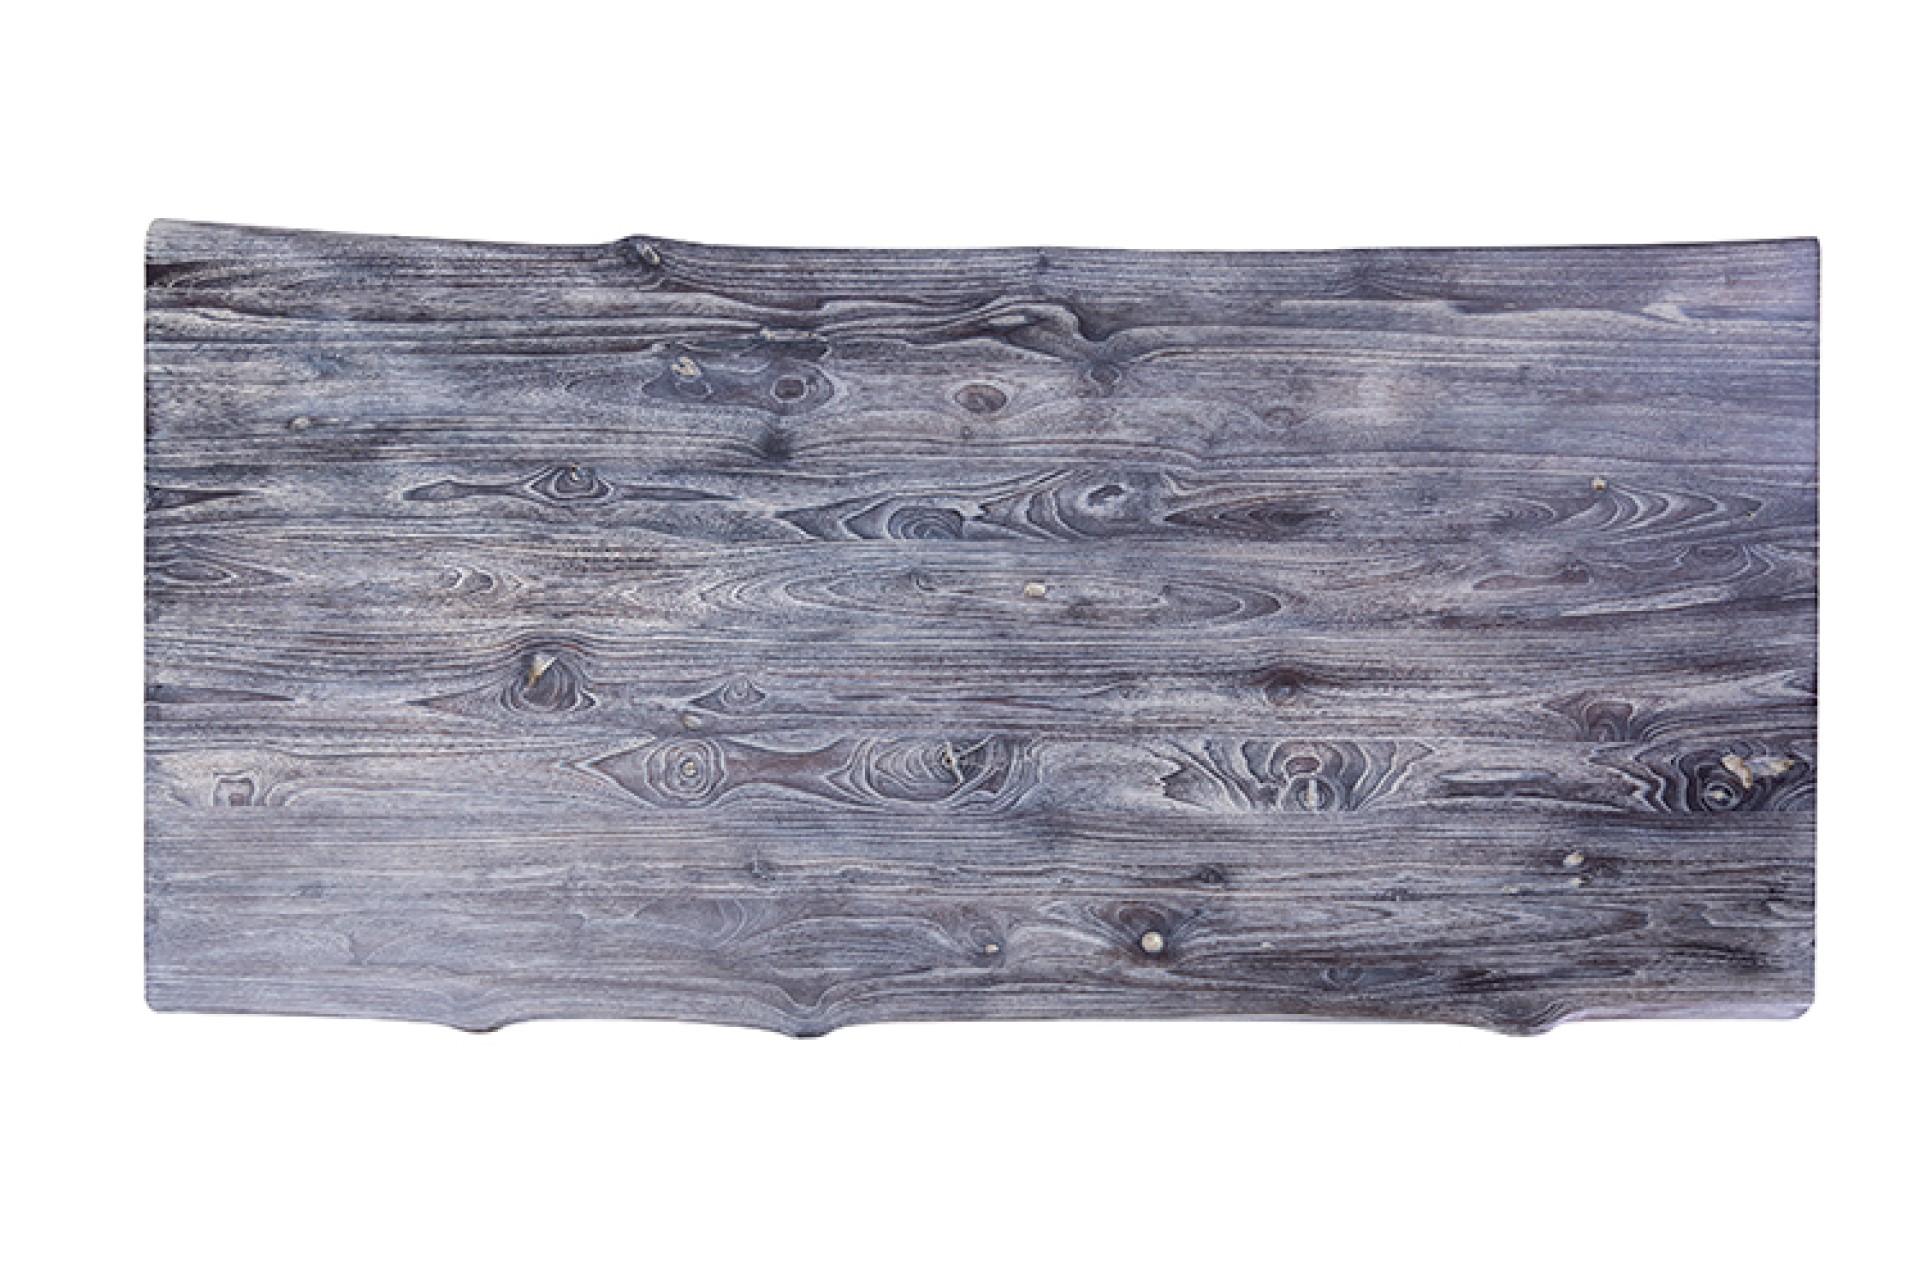 This gorgeous 96-inch by 40-inch table features a one-of-a-kind organic distressed top in our weathered stain.  Our organic distress finish celebrates the natural imperfections of the teak with a sandblasted finish to bring out the grain and a live